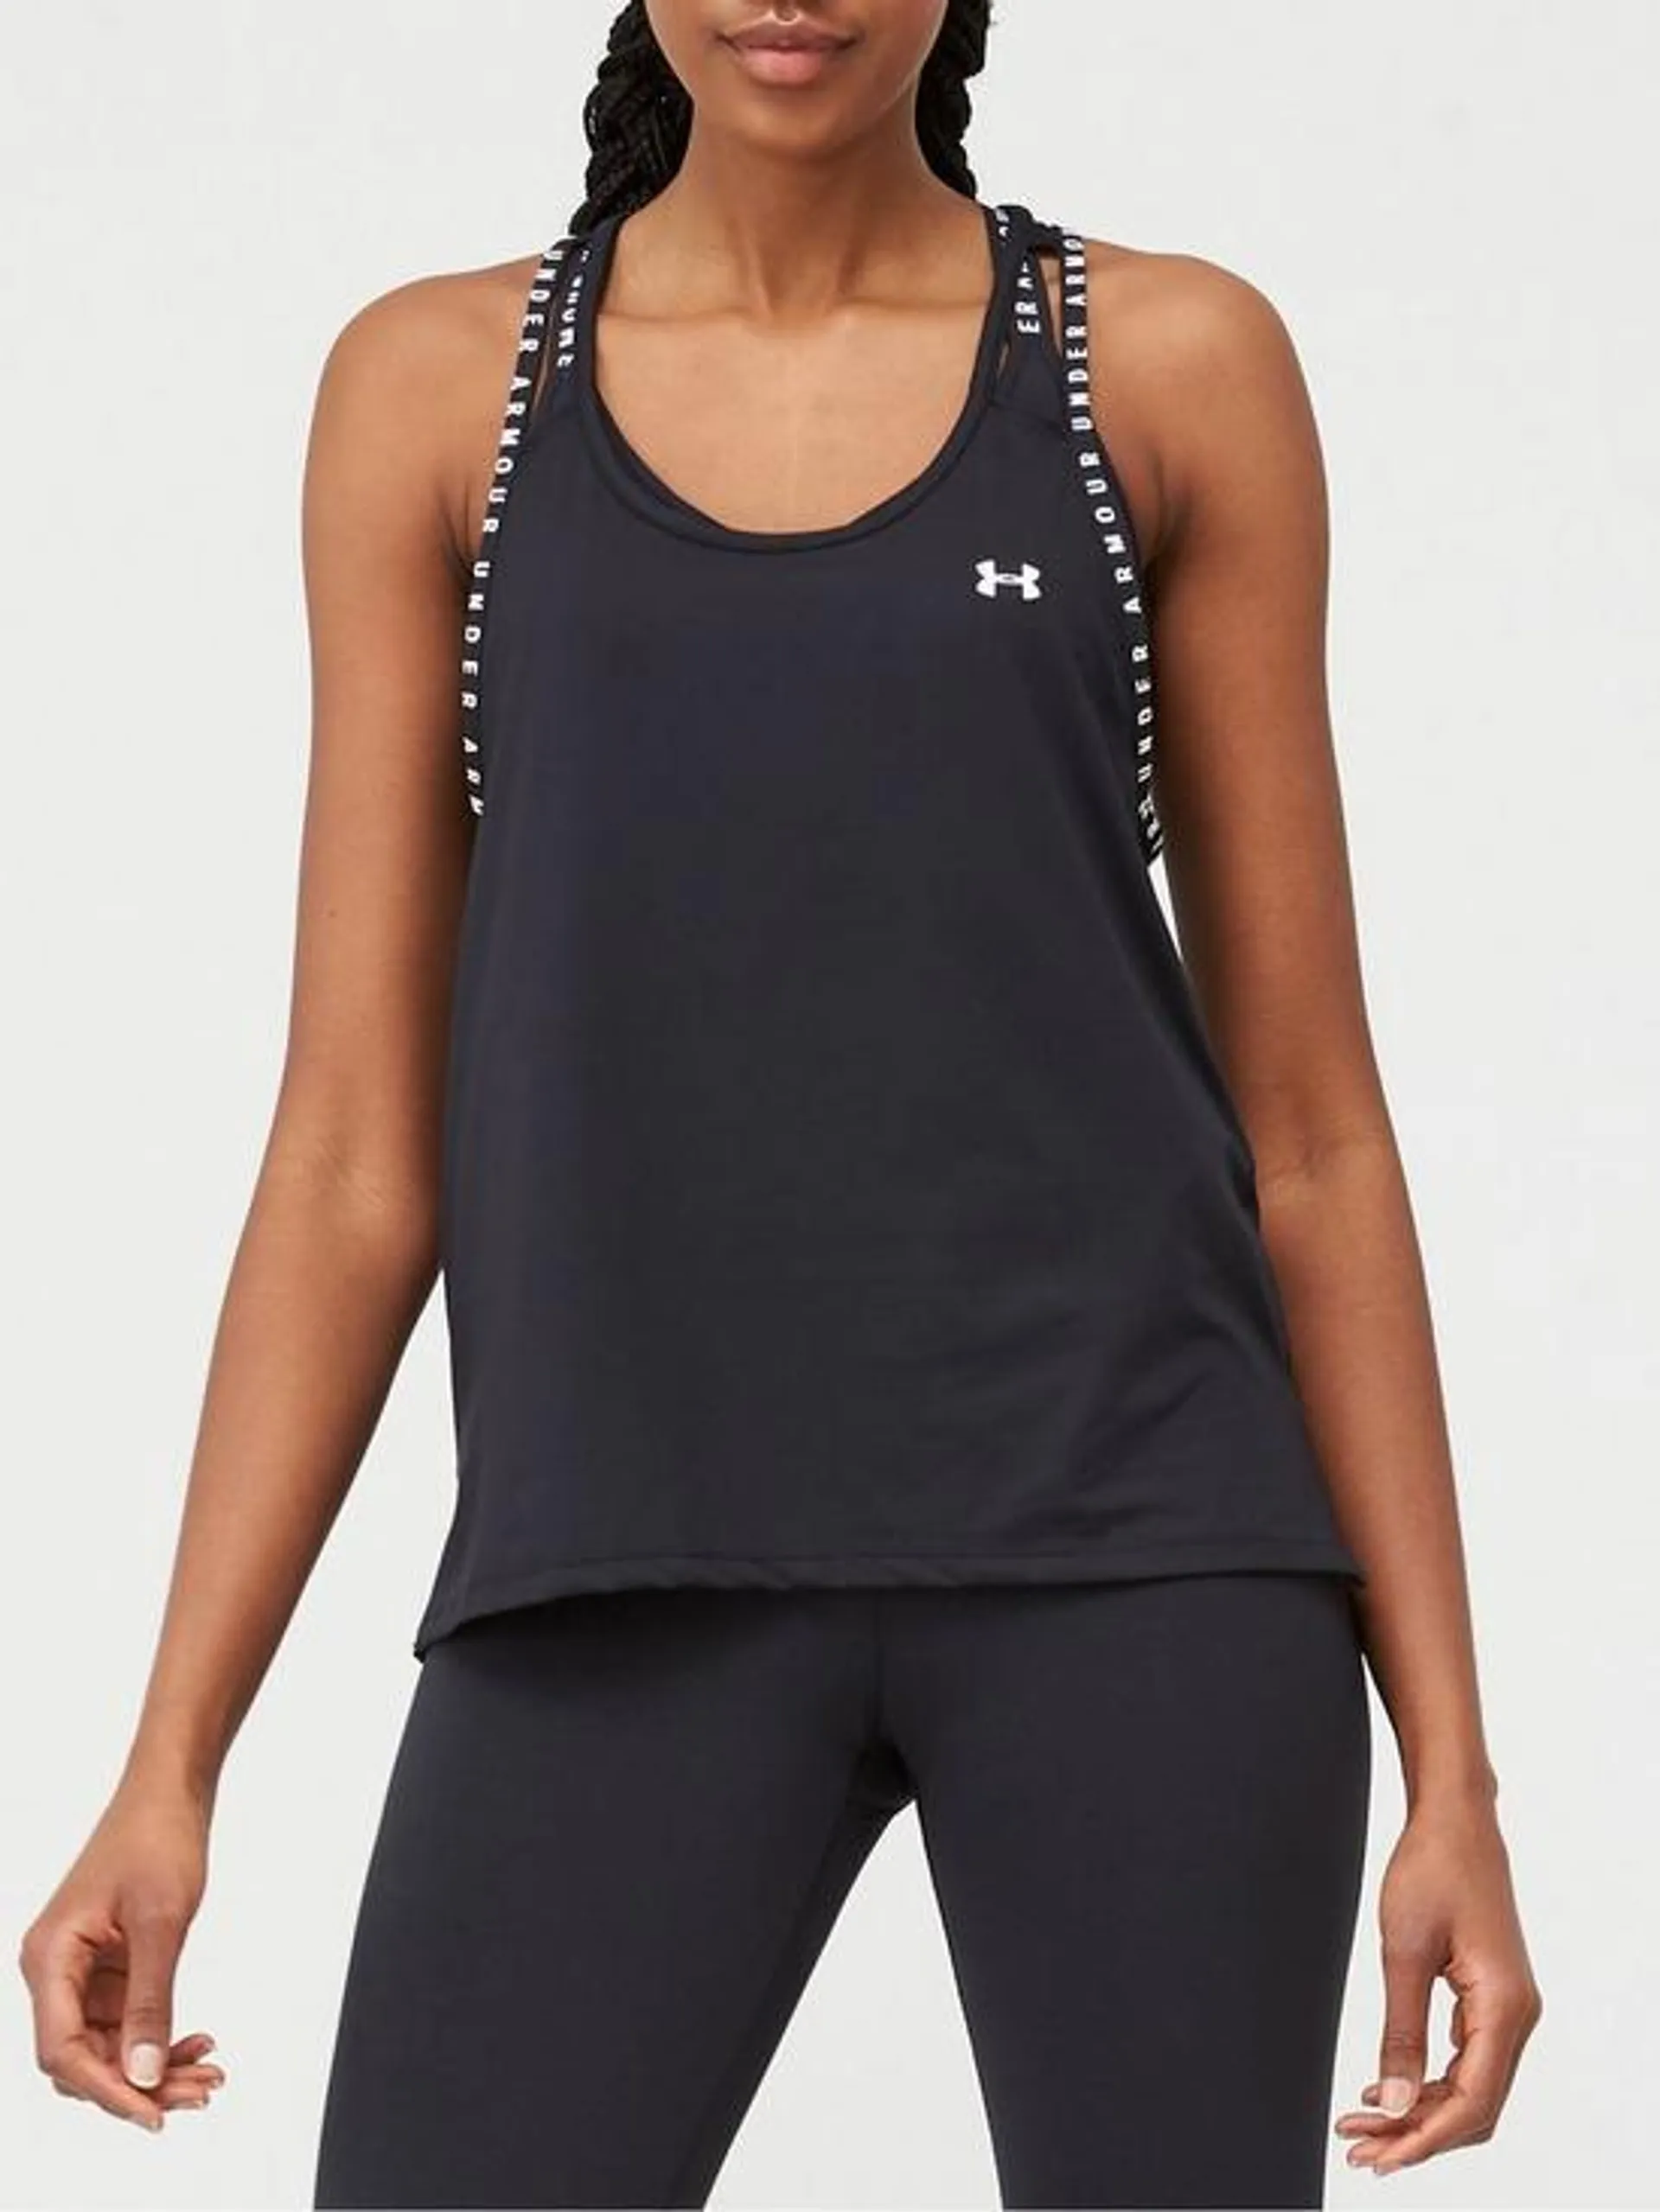 UNDER ARMOUR Knockout Tank Top - Black